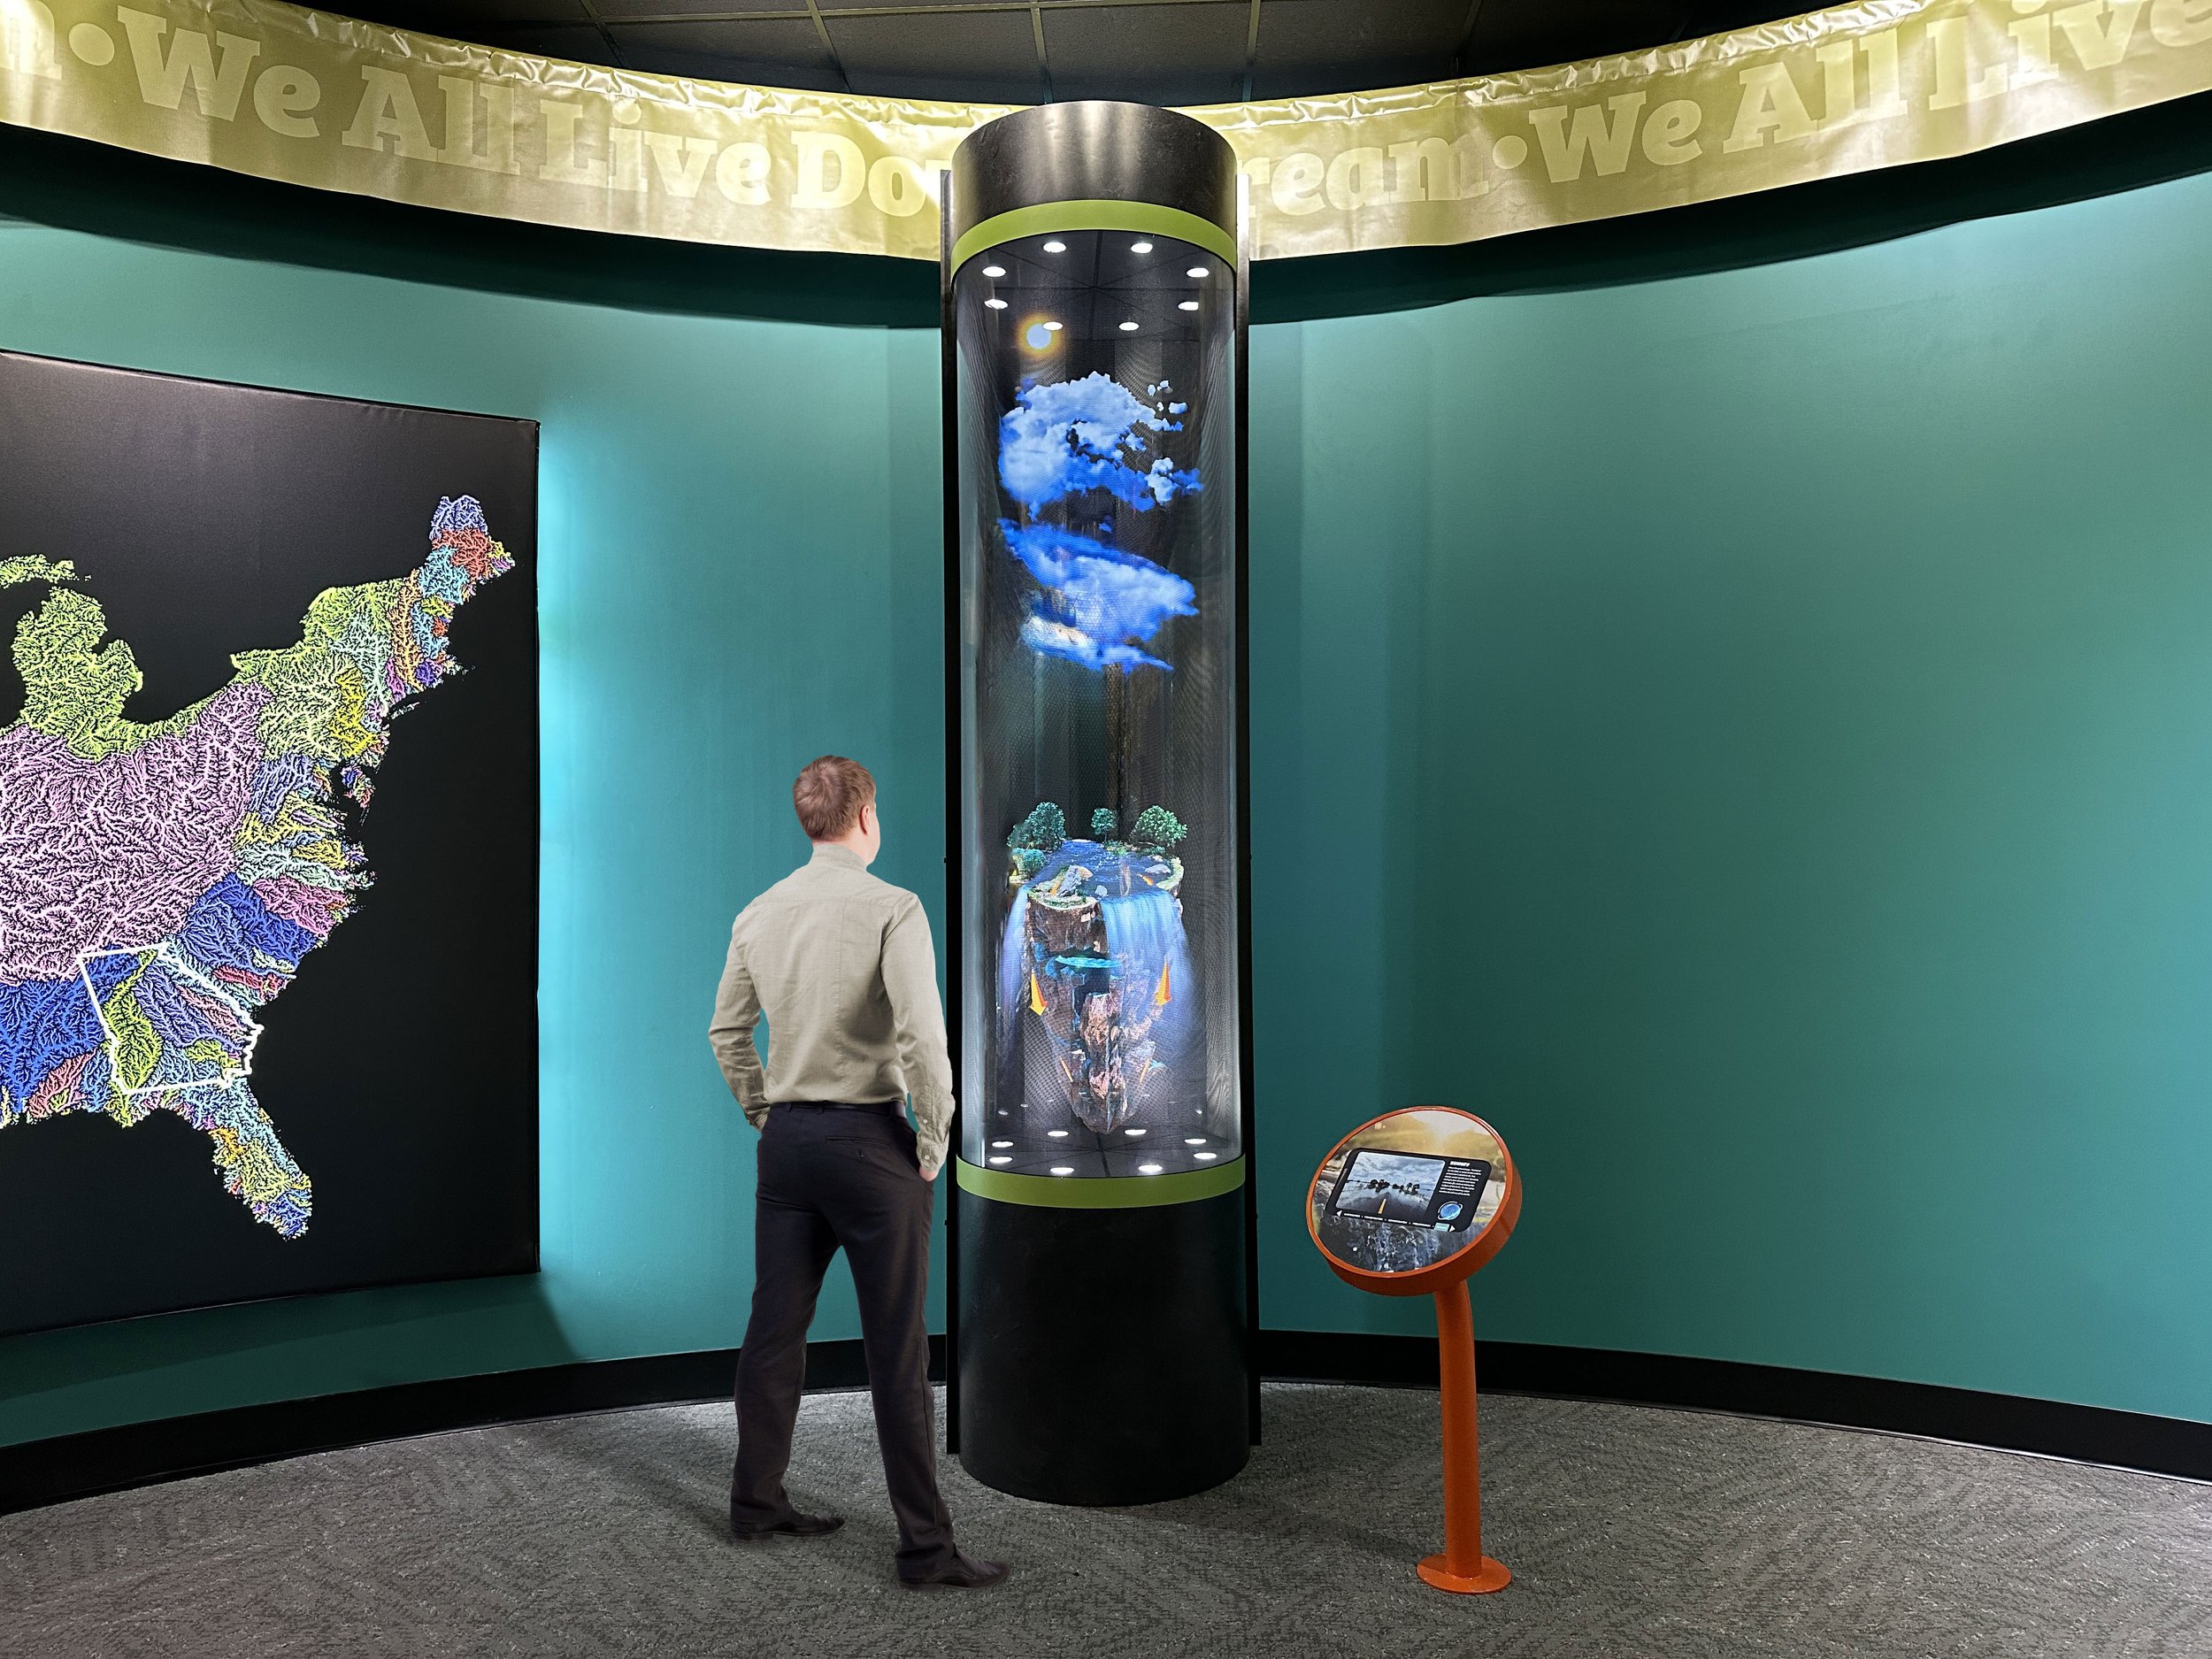    This stunning view of the HoloTube exhibit at Go Fish Education Center allows visitors to understand the water cycle's beauty and complexity.   